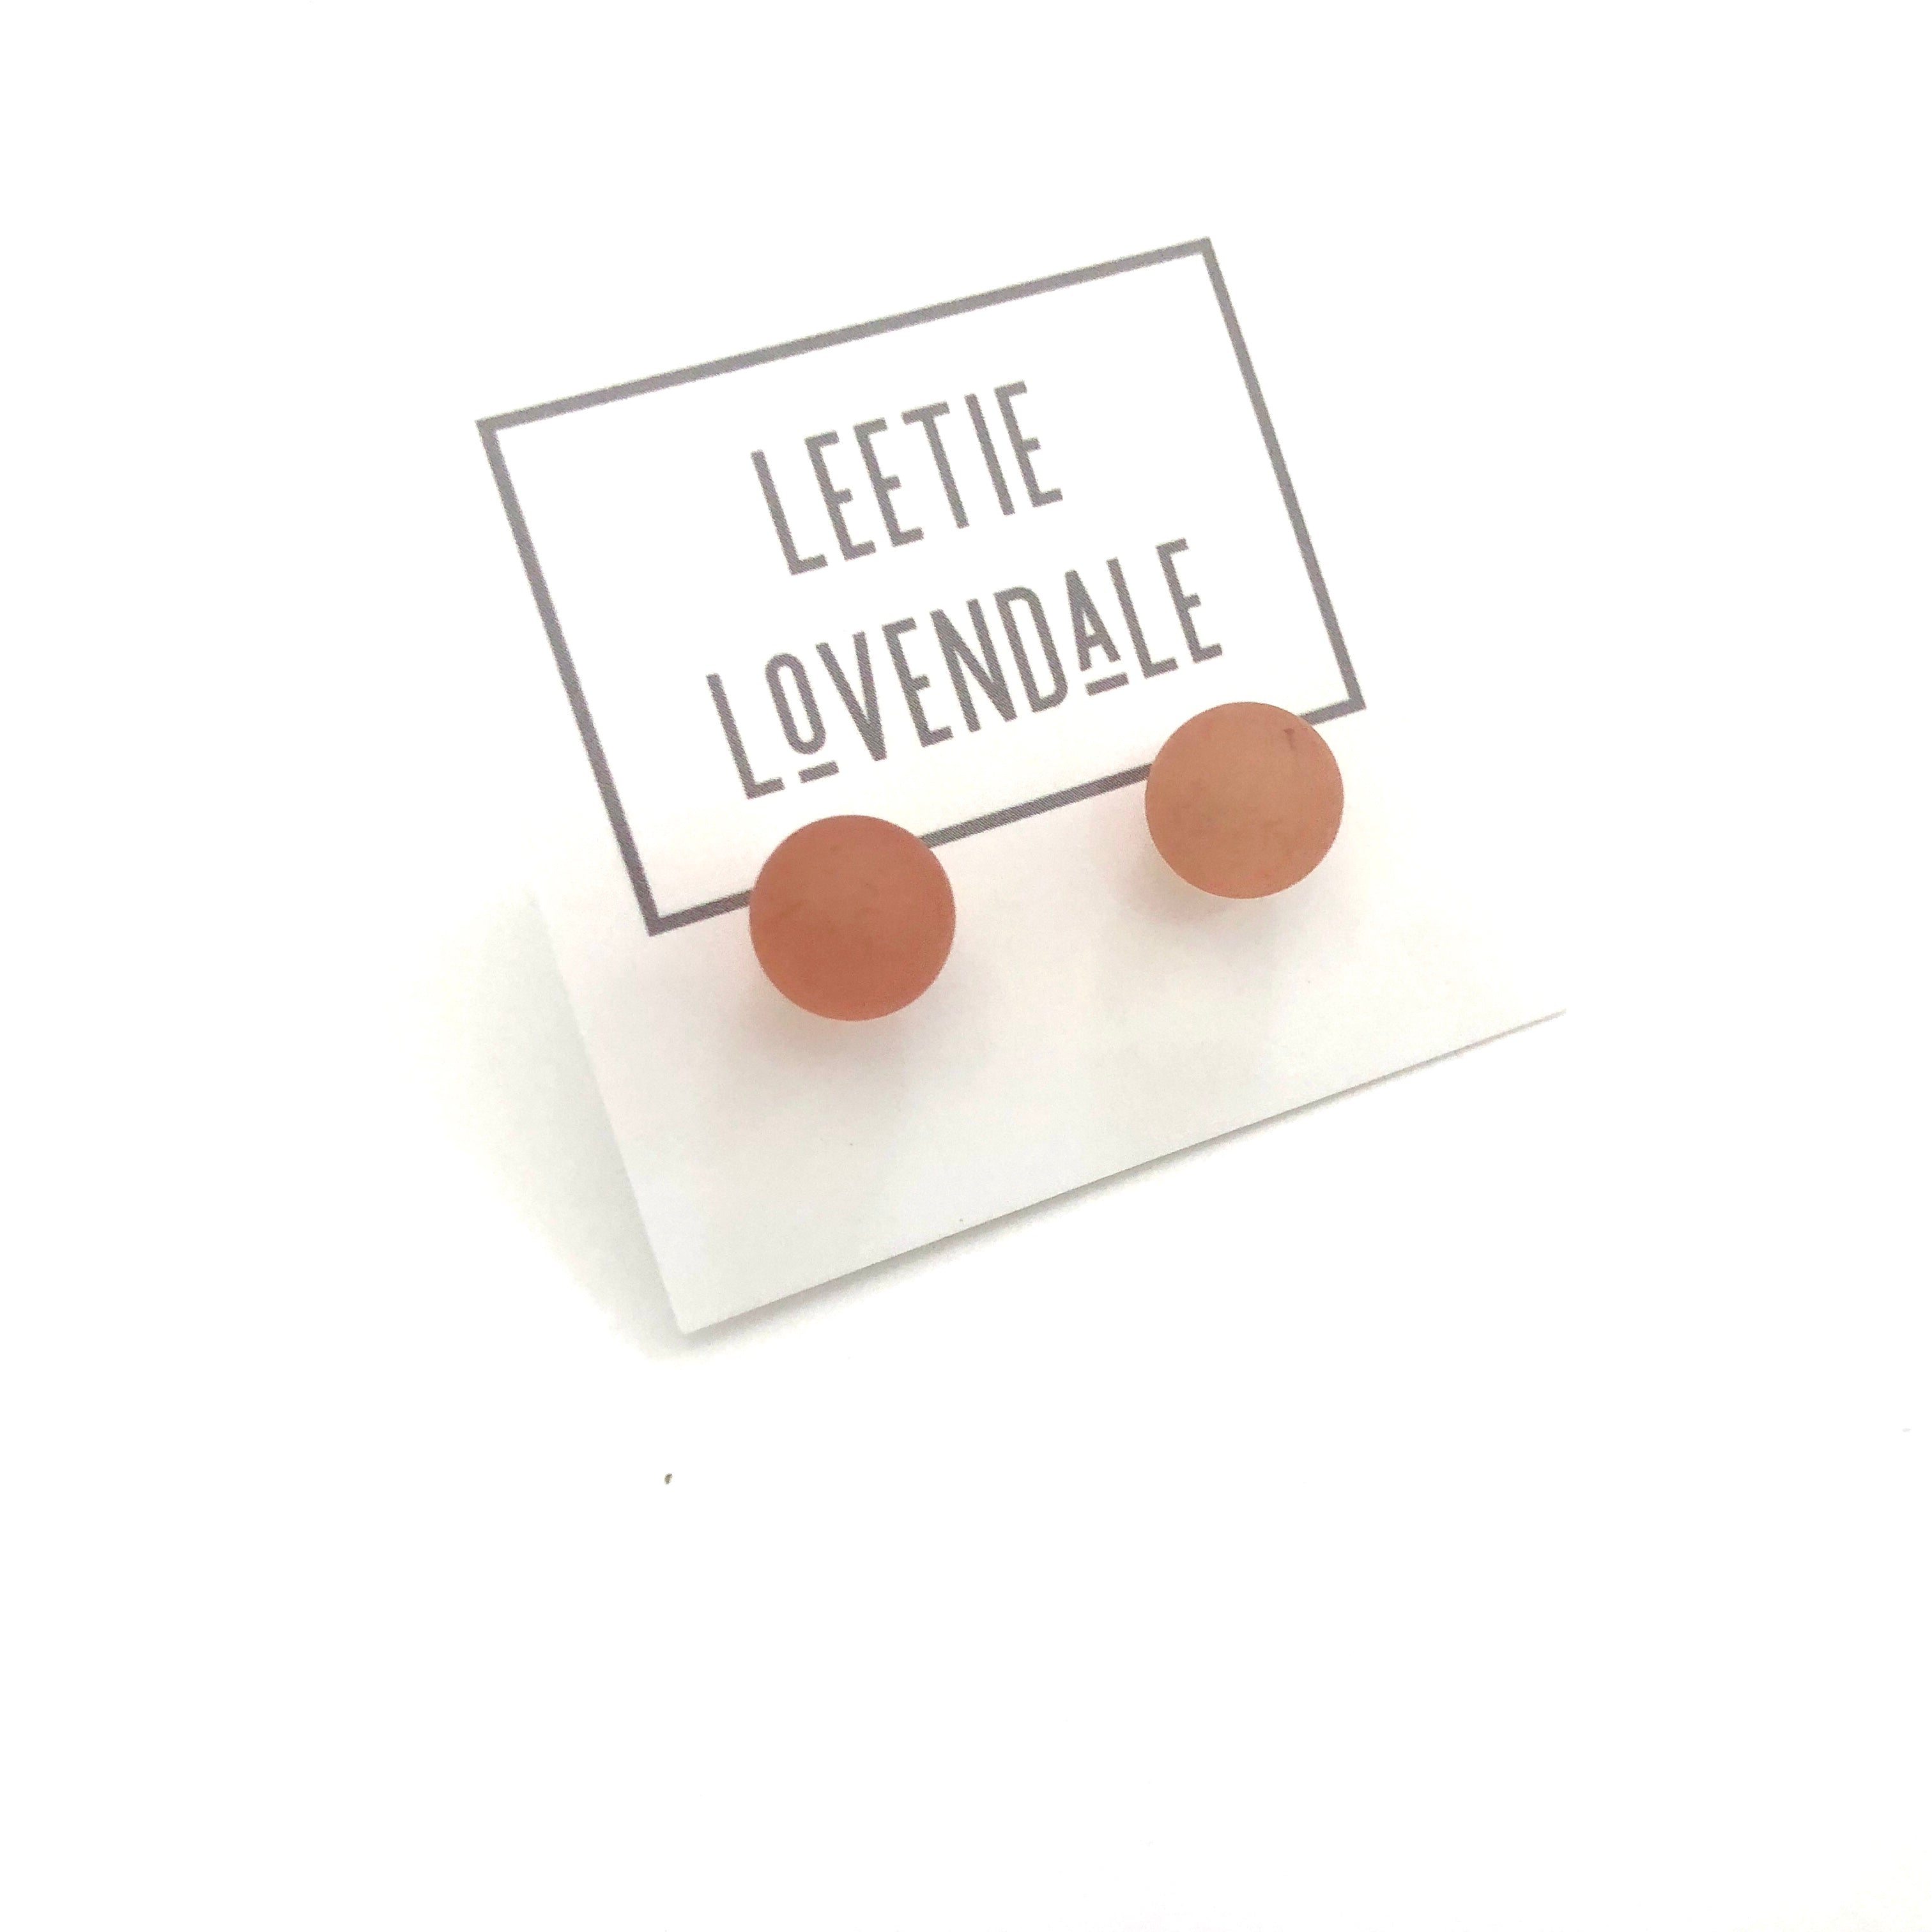 Burnt Coral Petite Frosted Lucite Ball Stud Earrings